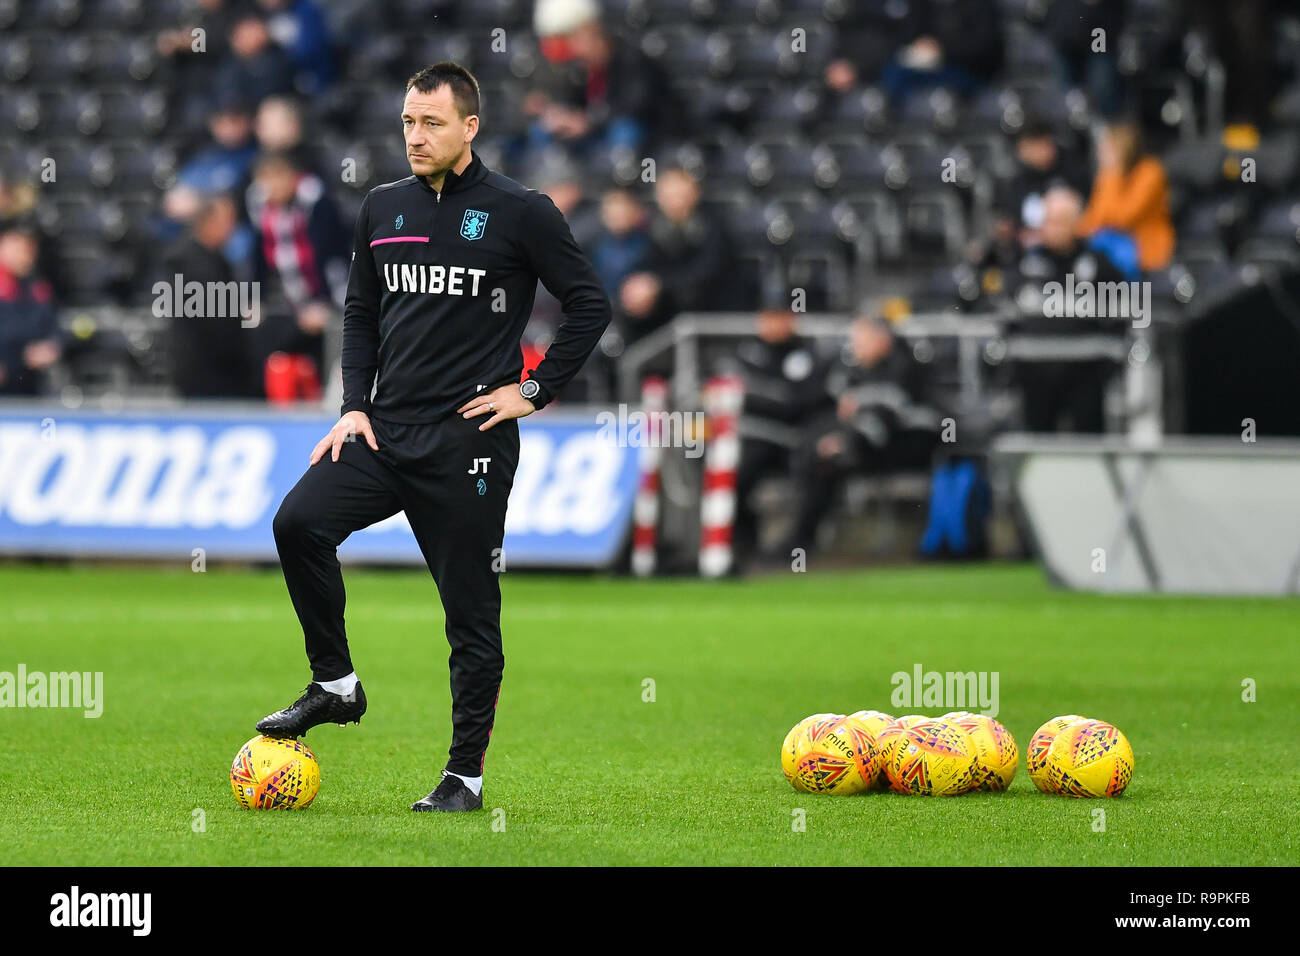 26th December 2018, Liberty Stadium, Swansea, Wales; Sky Bet Championship, Swansea vs  Aston Villa ; John Terry Aston Villas assistant coach during the pre-match warm-up   Credit: Craig Thomas/News Images  English Football League images are subject to DataCo Licence Stock Photo